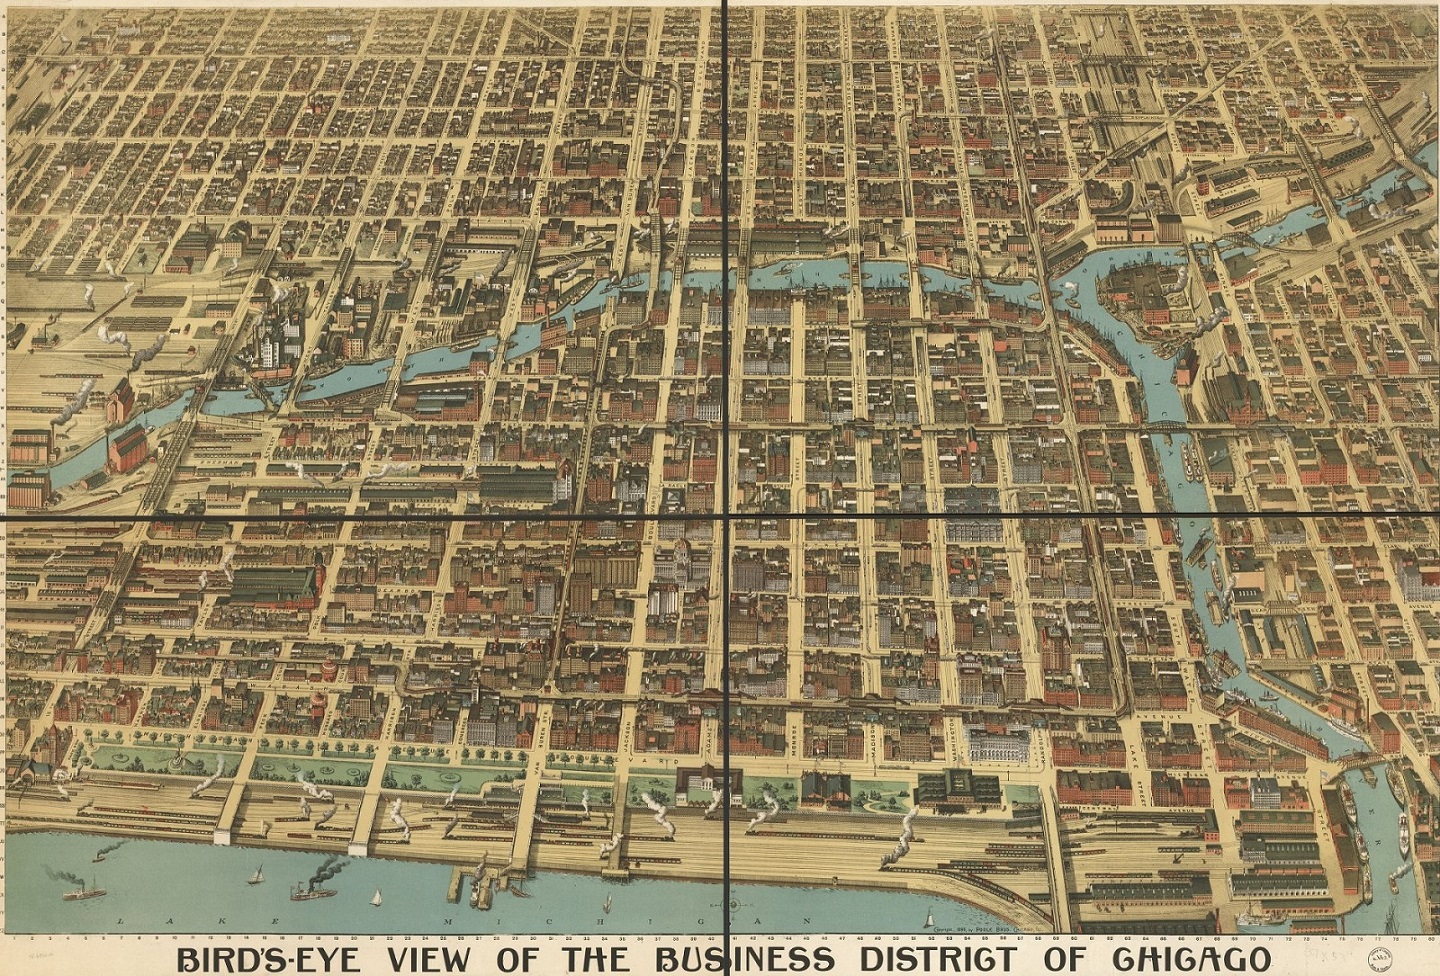 1898 Drawn Picture of Chicago Business District